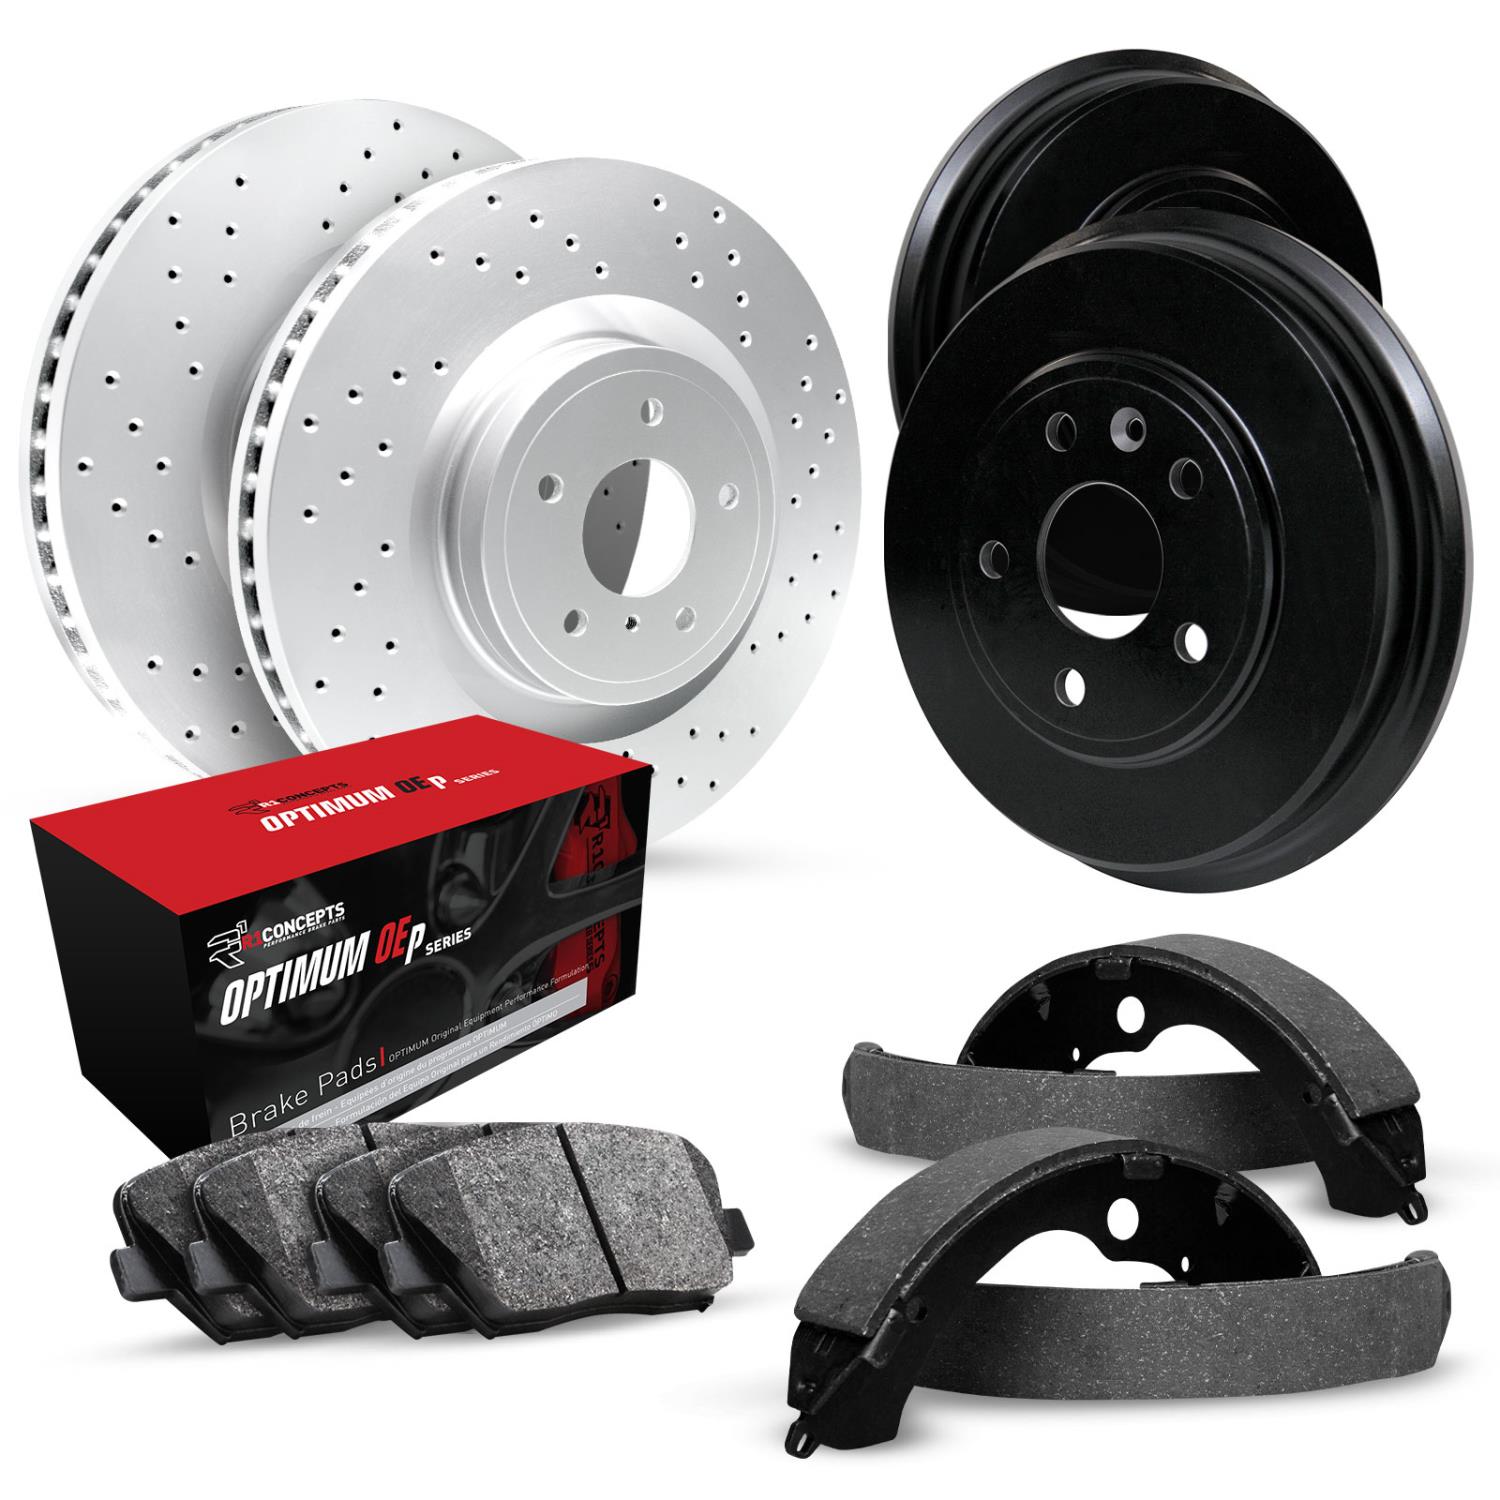 GEO-Carbon Drilled Brake Rotor & Drum Set w/Optimum OE Pads & Shoes, 1992-2000 GM, Position: Front & Rear